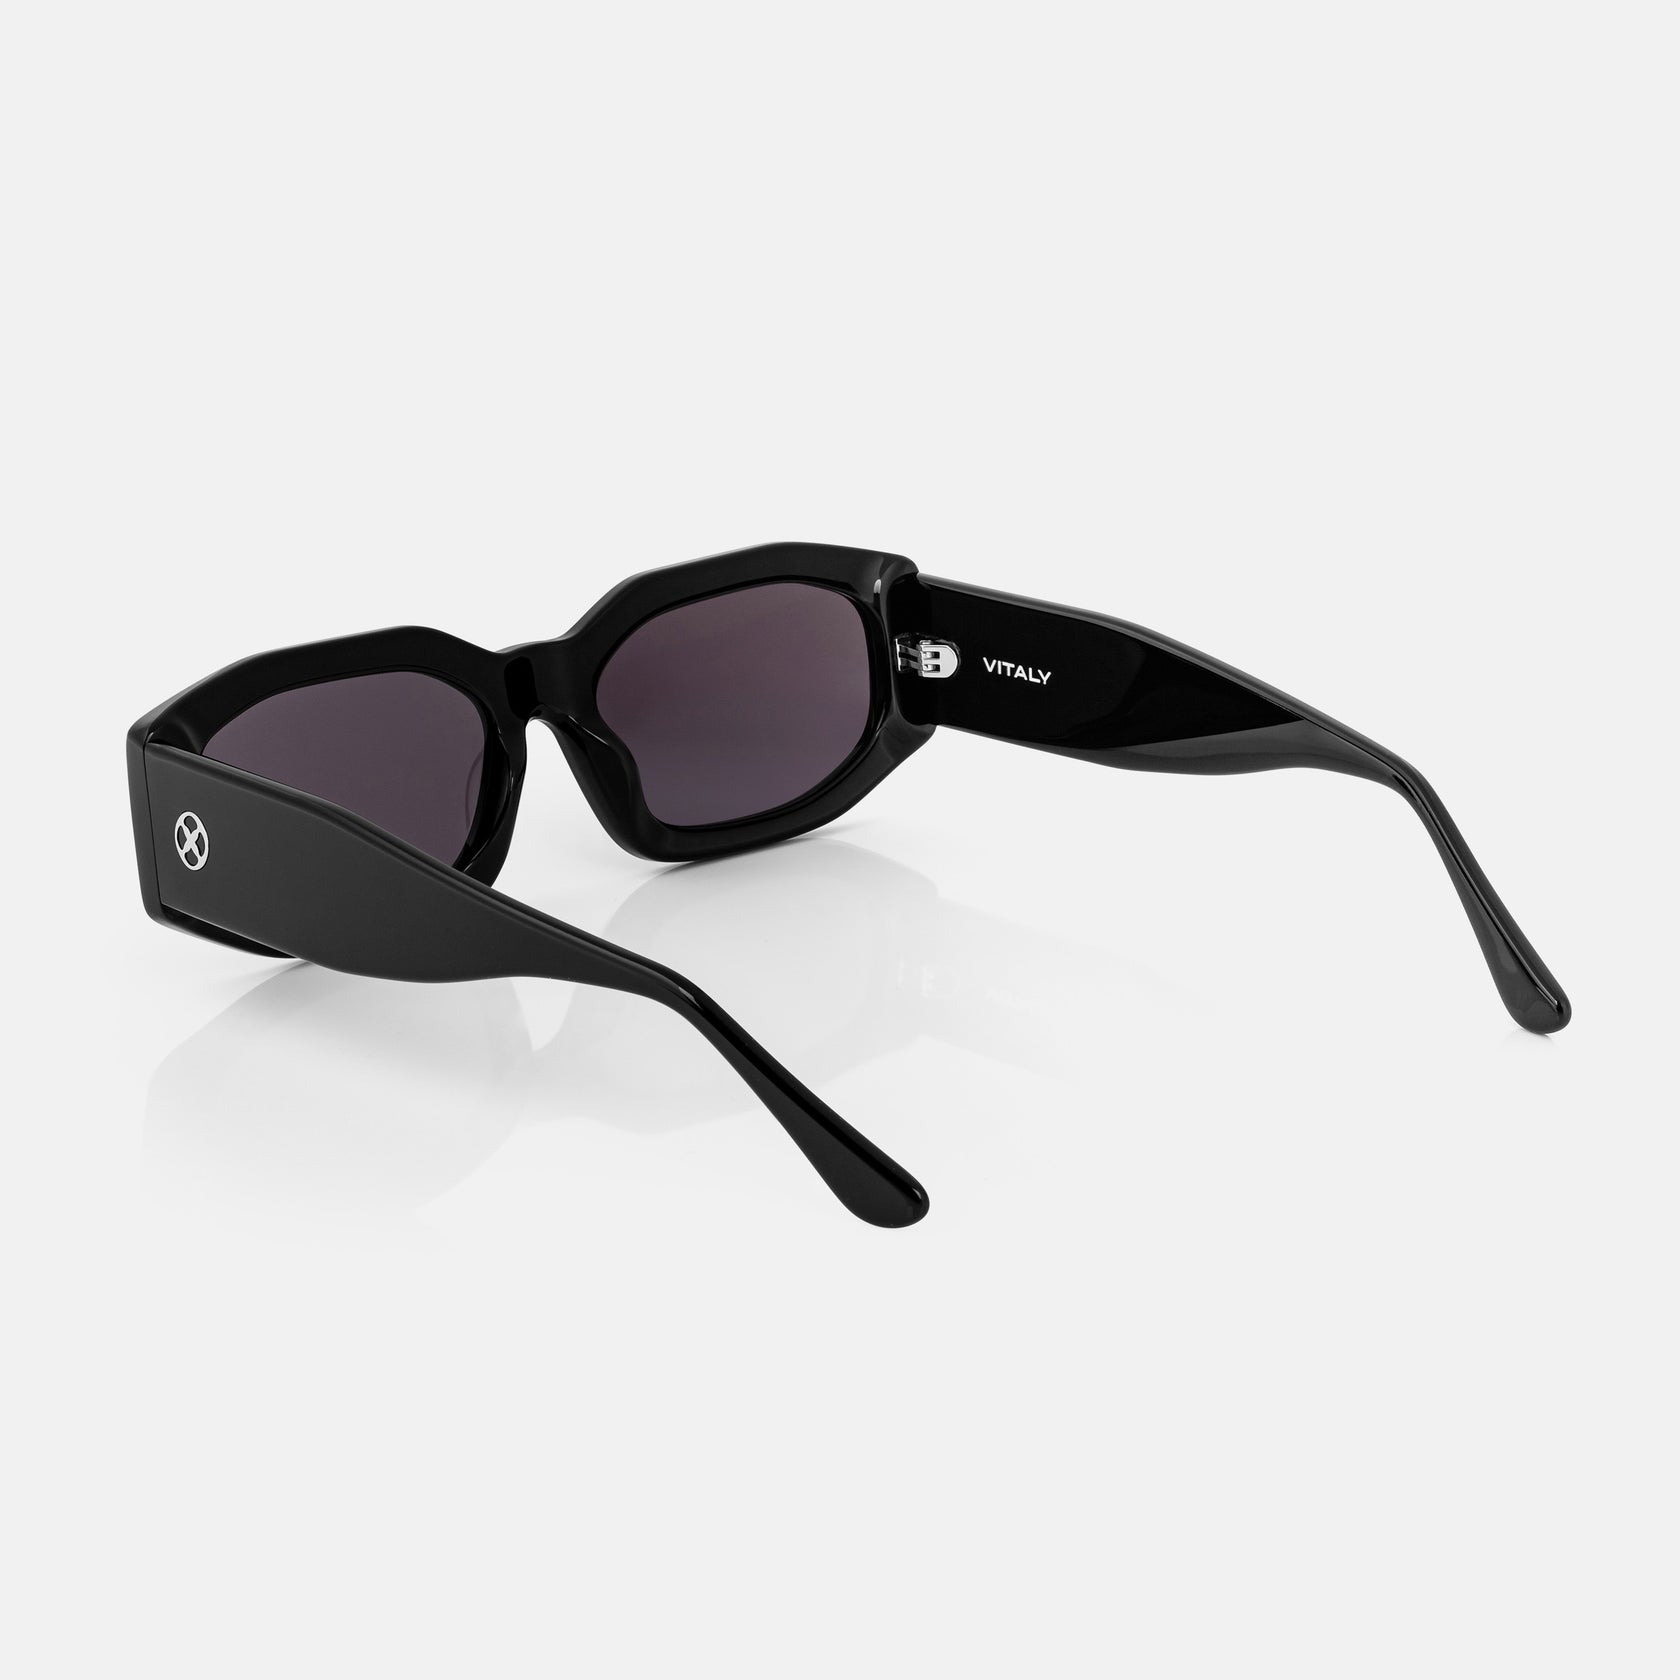 Vitaly | Stainless Steel Accessories | The Empire Sunglasses